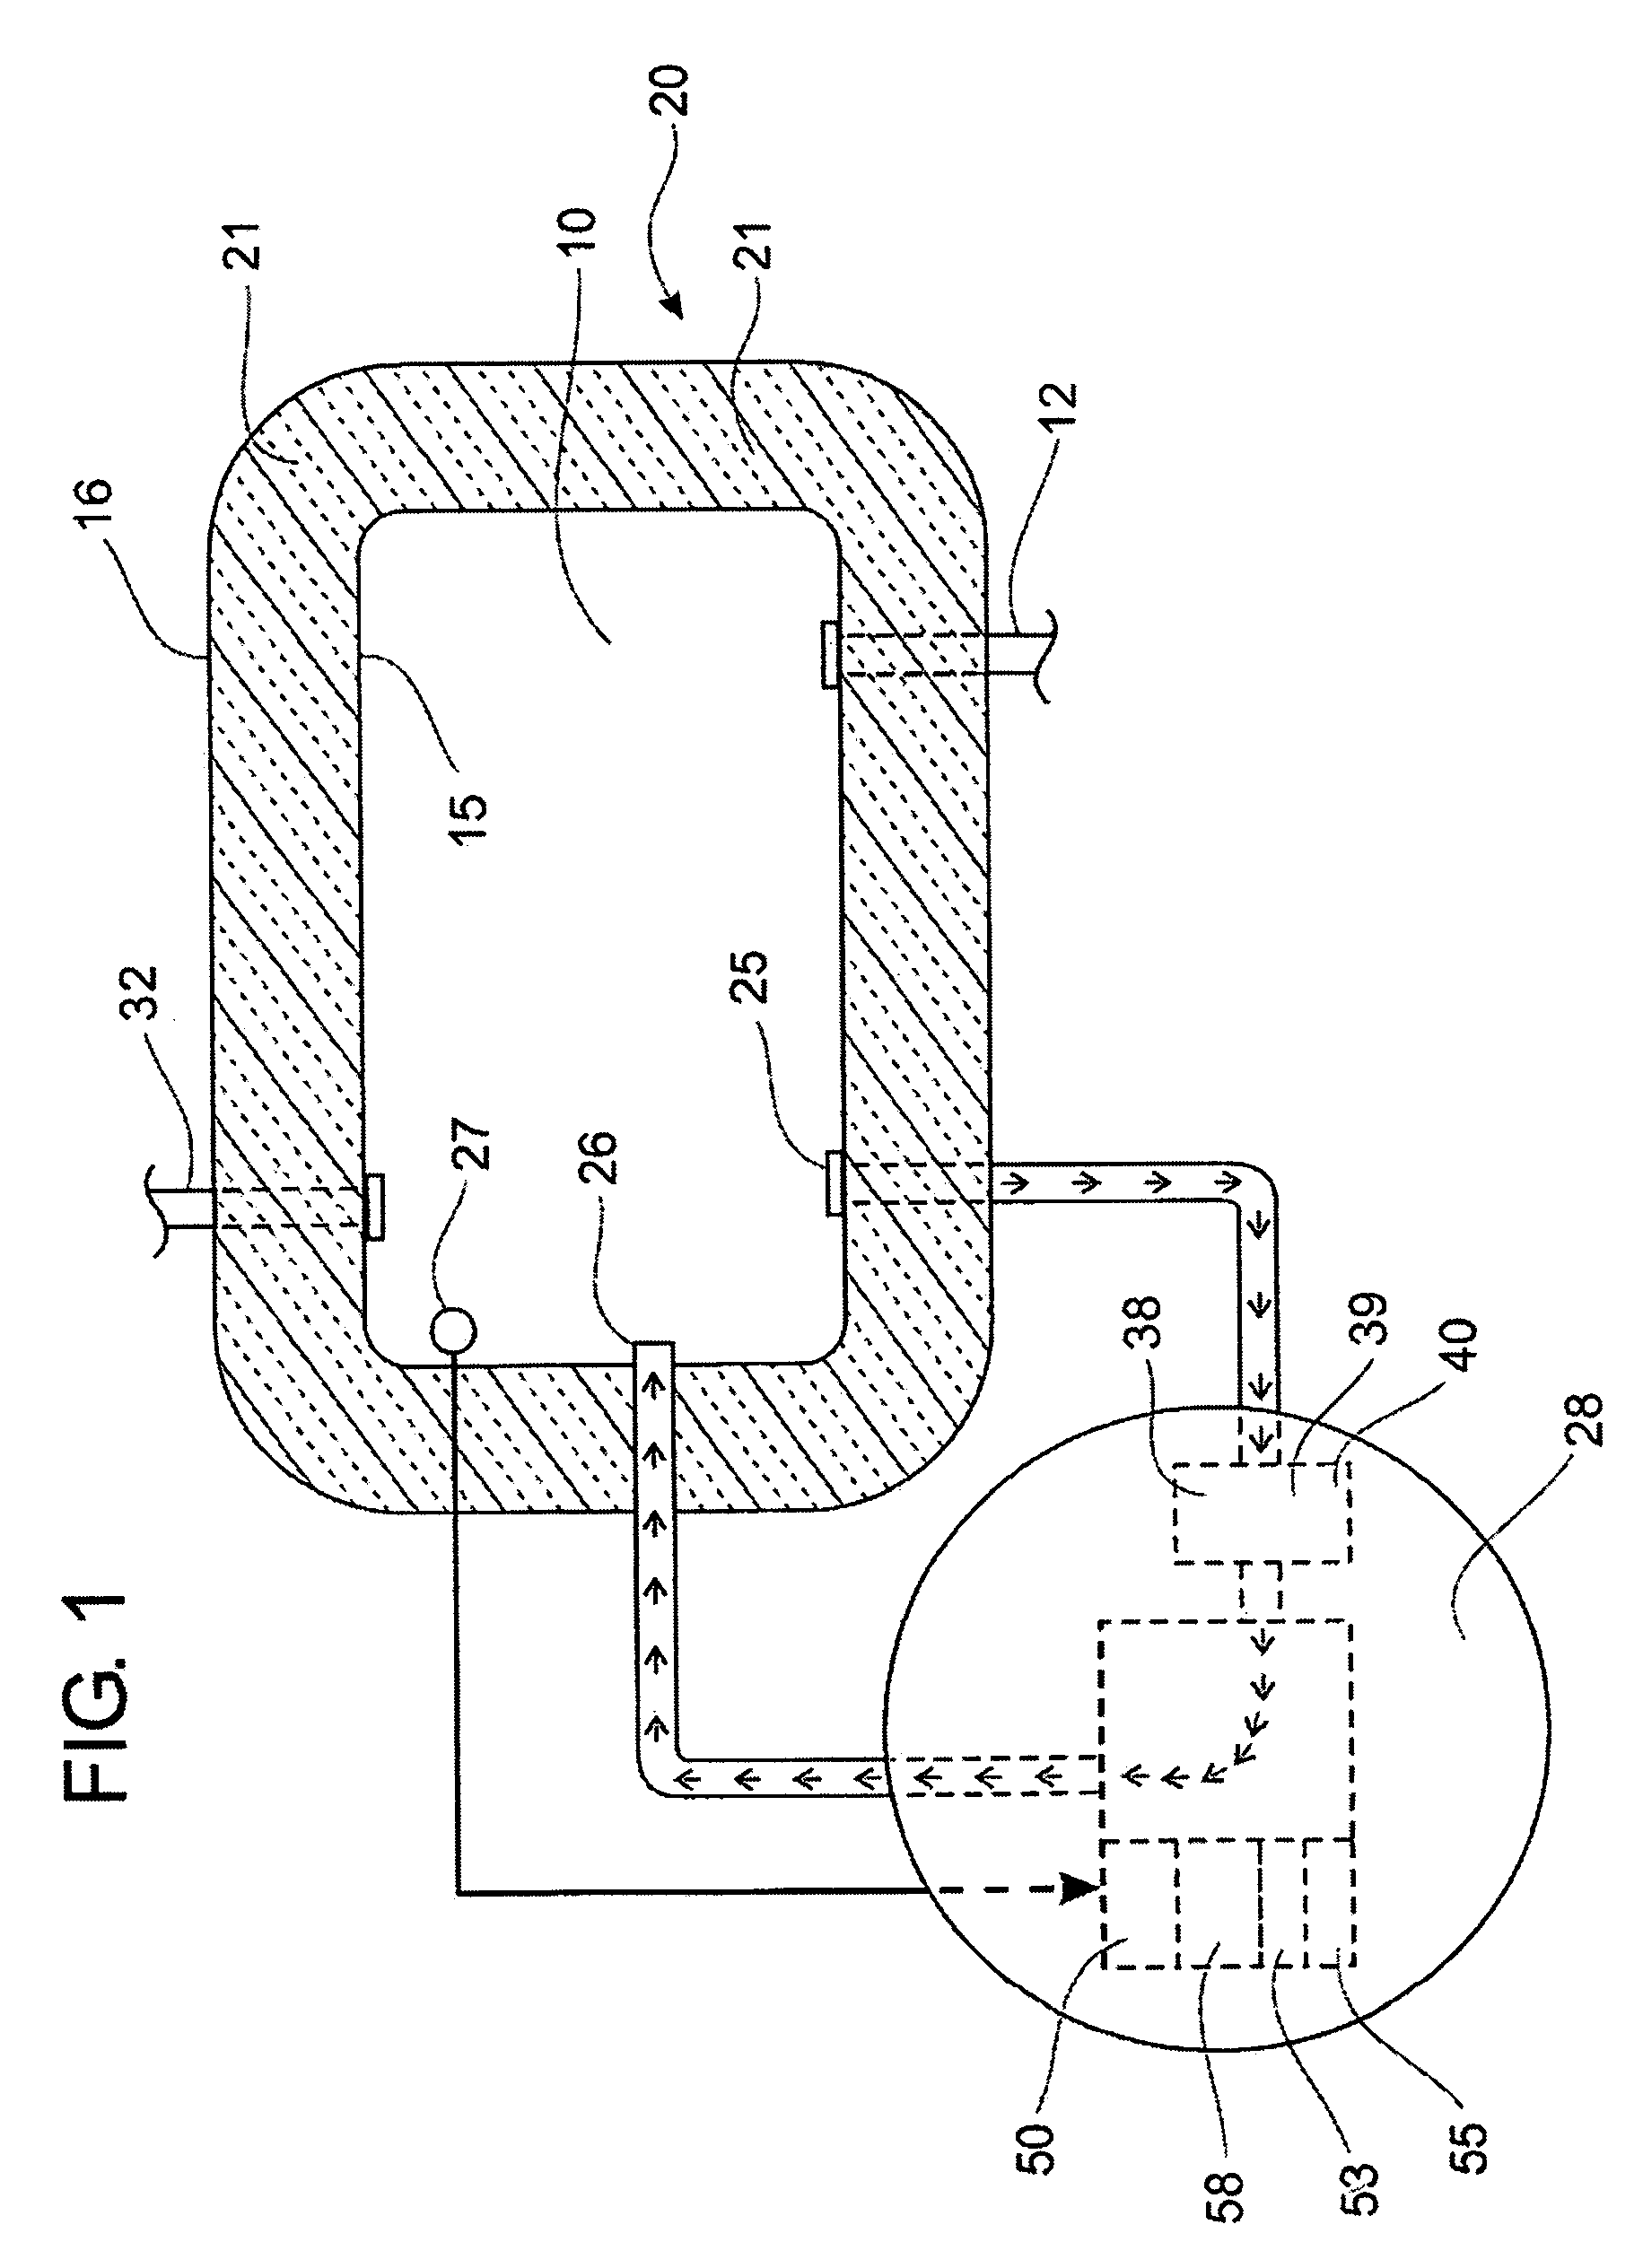 Fish or fish bait life preservation apparatus and method